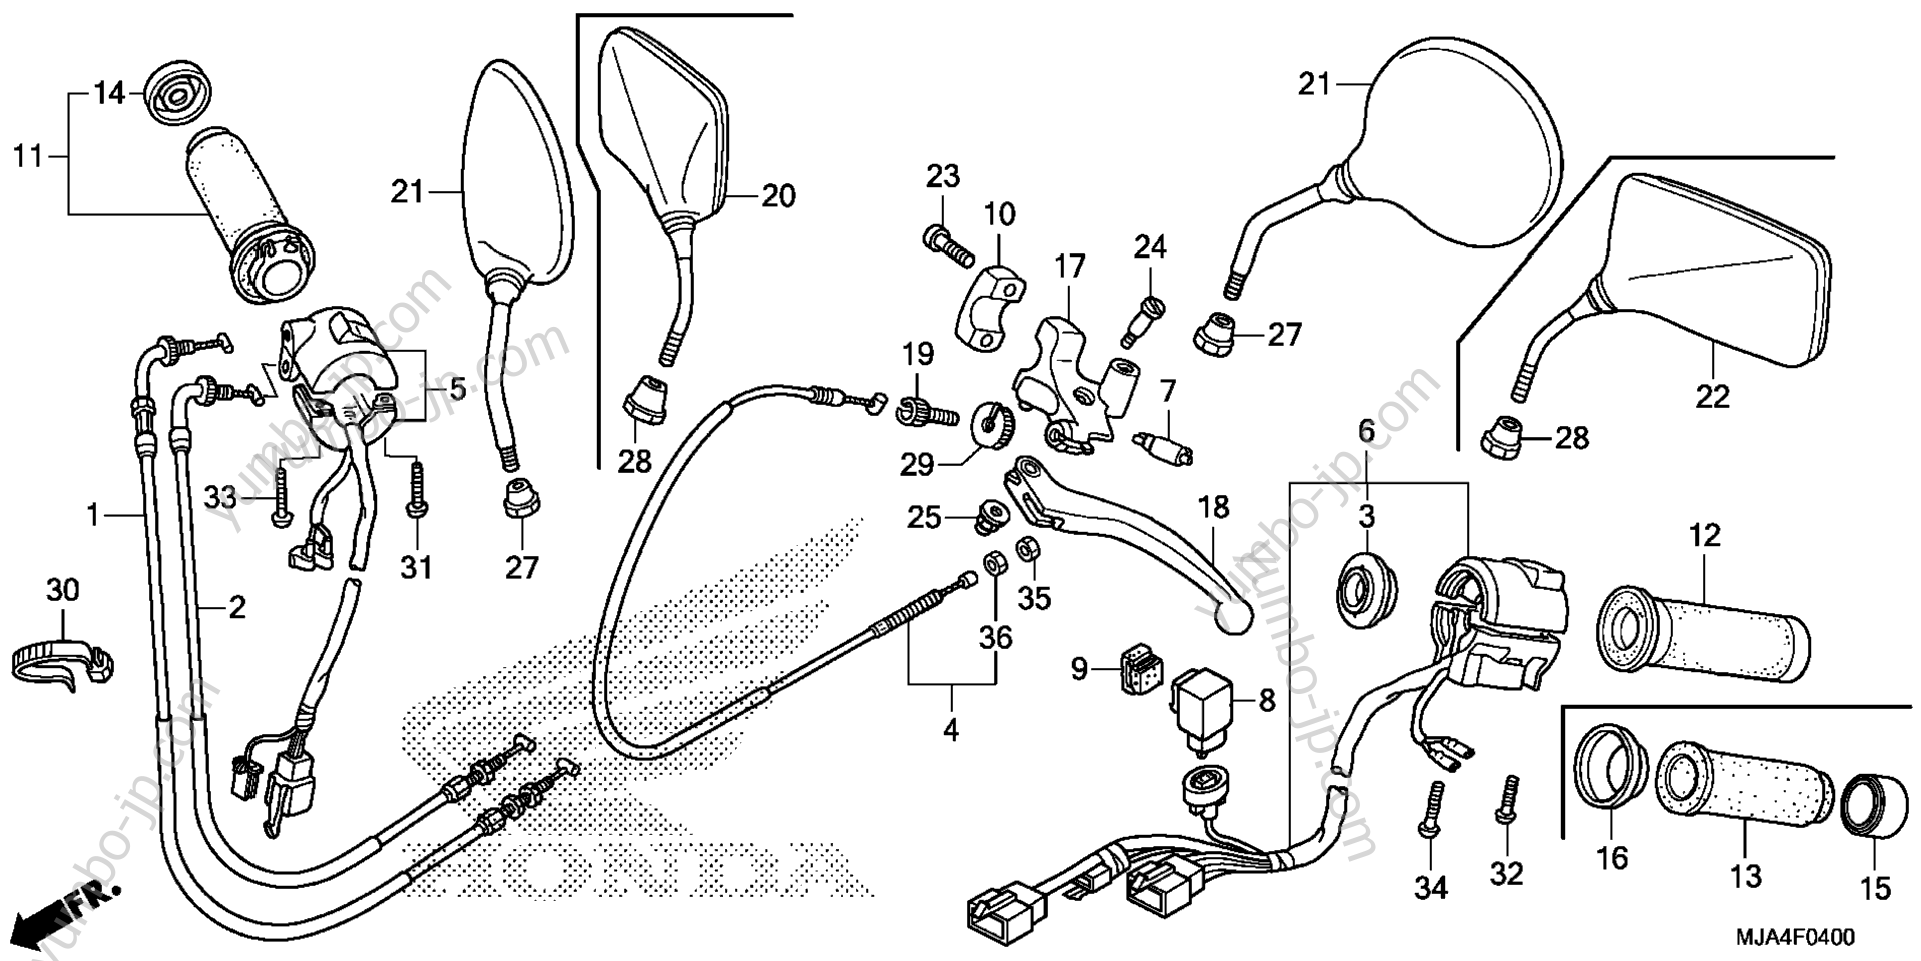 HANDLE LEVER / SWITCH / CABLE for motorcycles HONDA VT750C2B A 2012 year